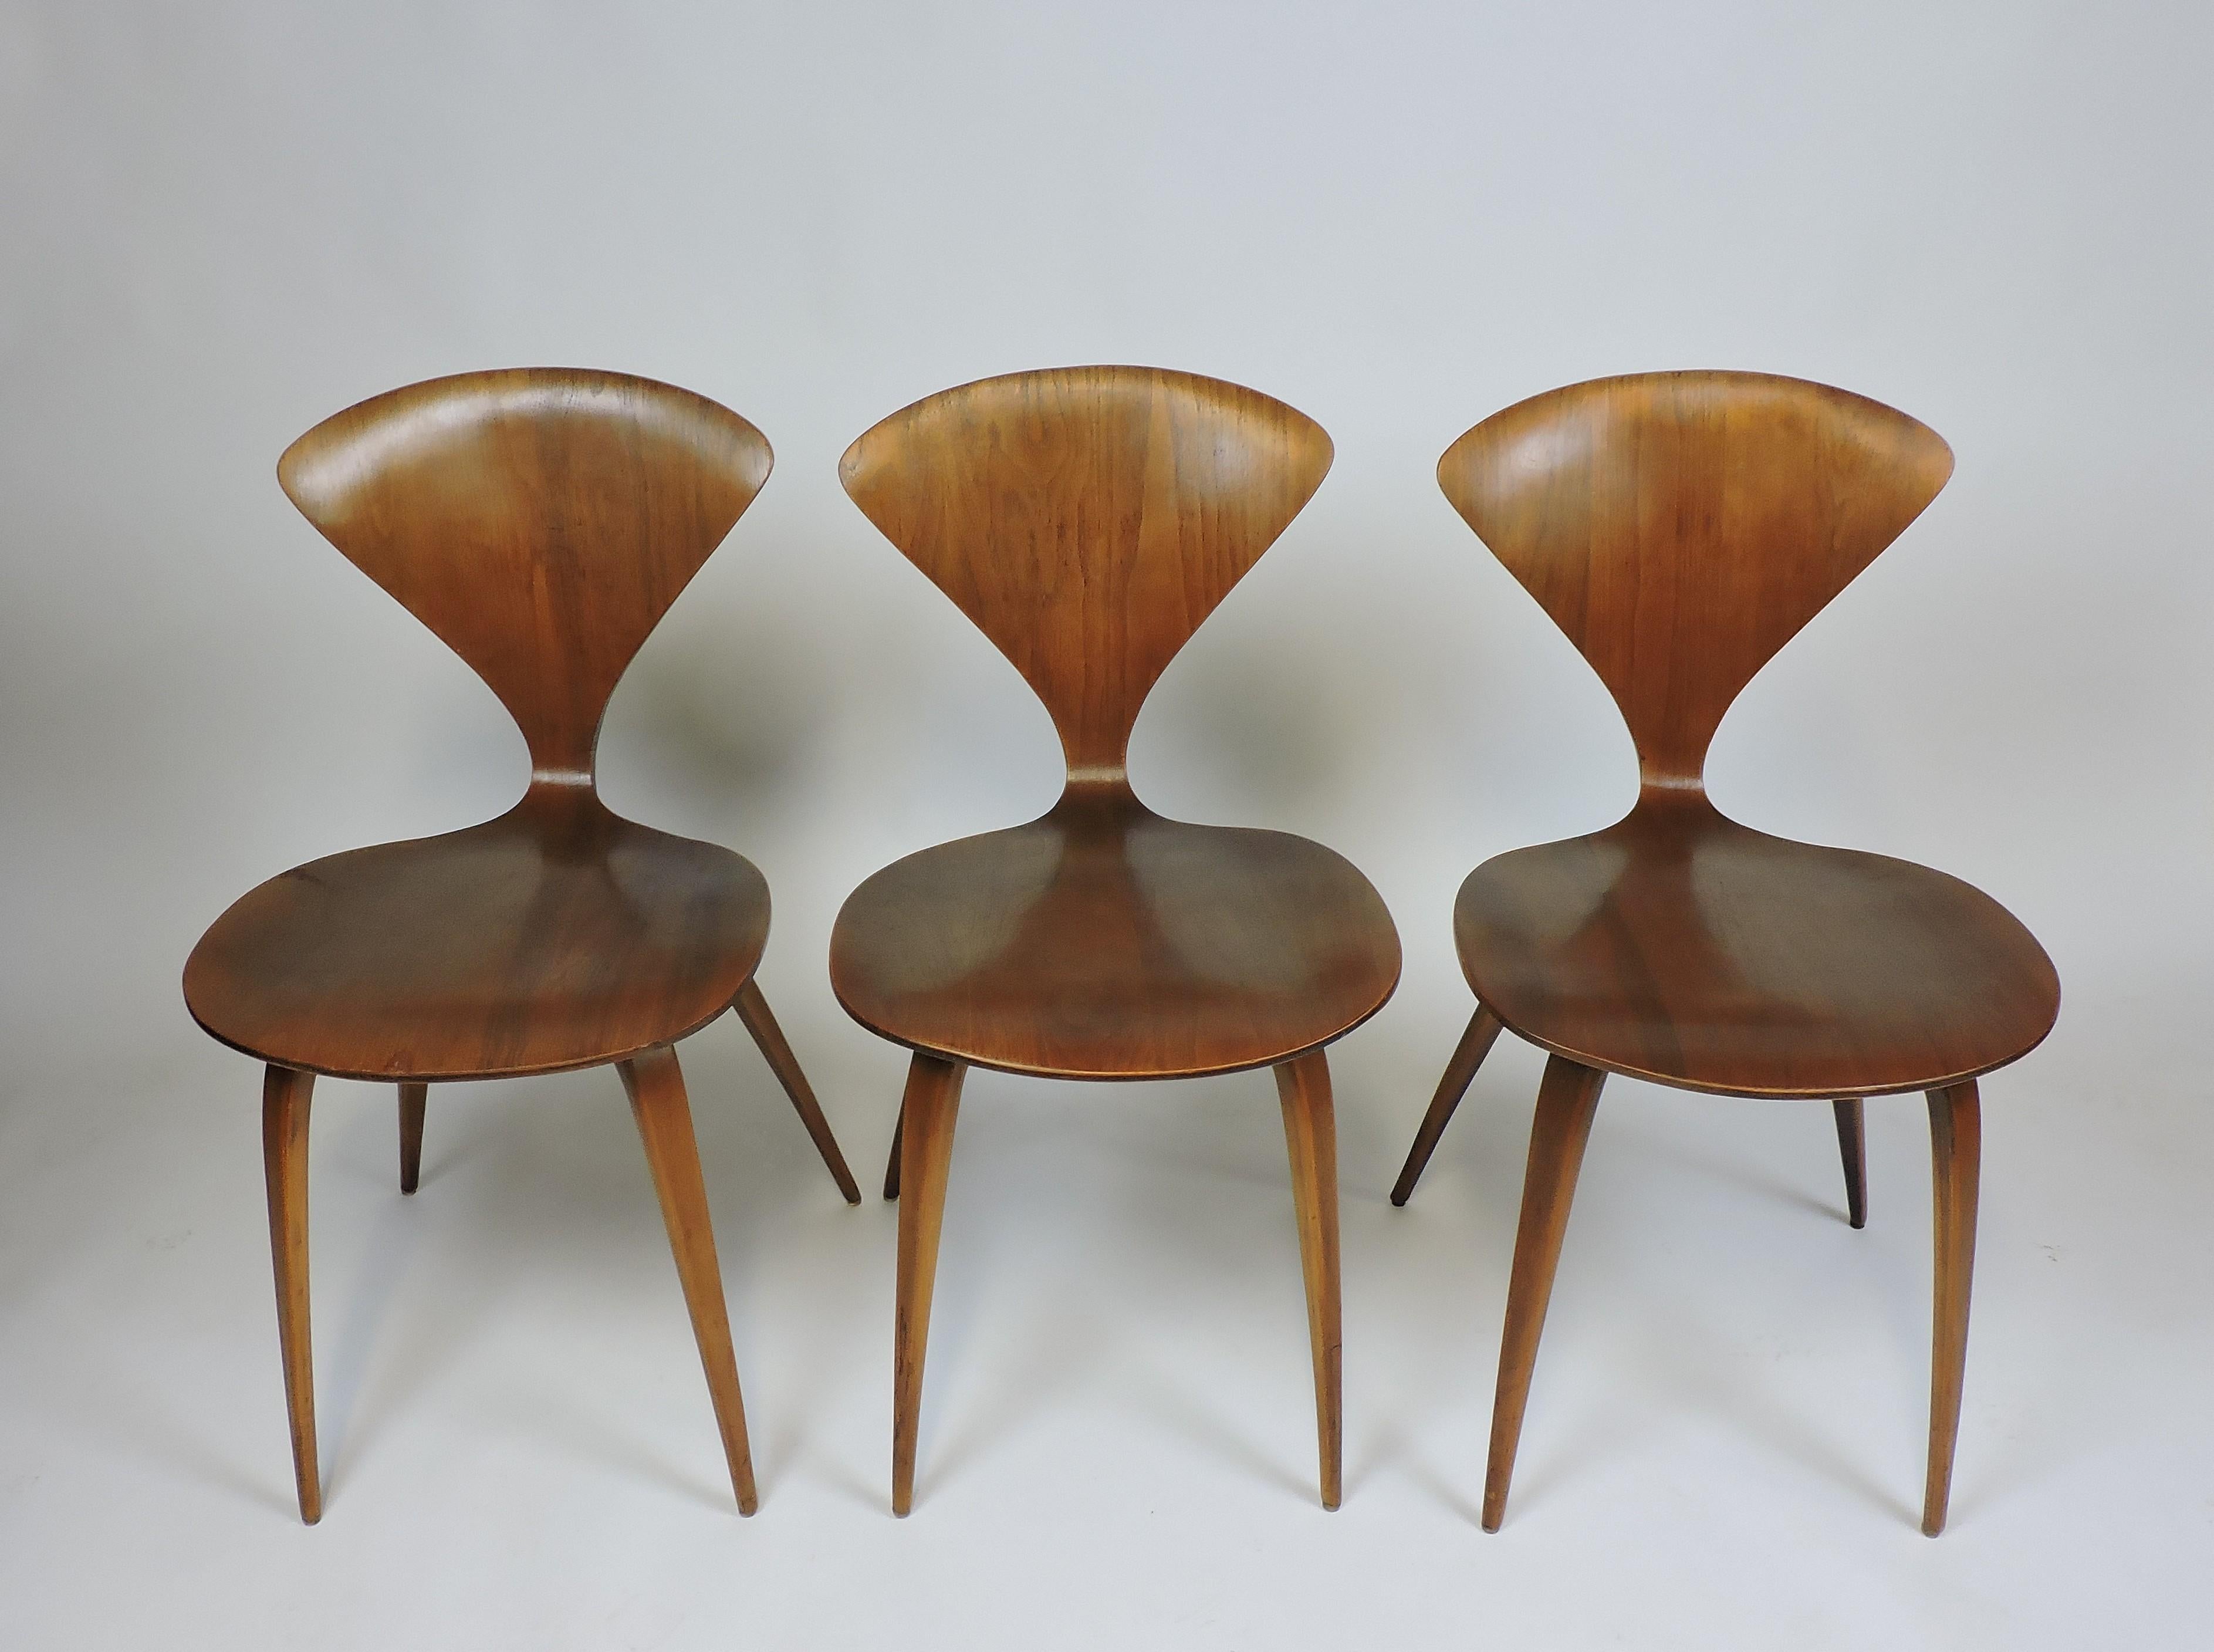 Original 1960s set of three dining or side chairs designed by Norman Cherner and manufactured by Plycraft. These bentwood chairs have a Classic midcentury design with beautiful walnut wood grain. Partial Plycraft label to the bottom of one chair.